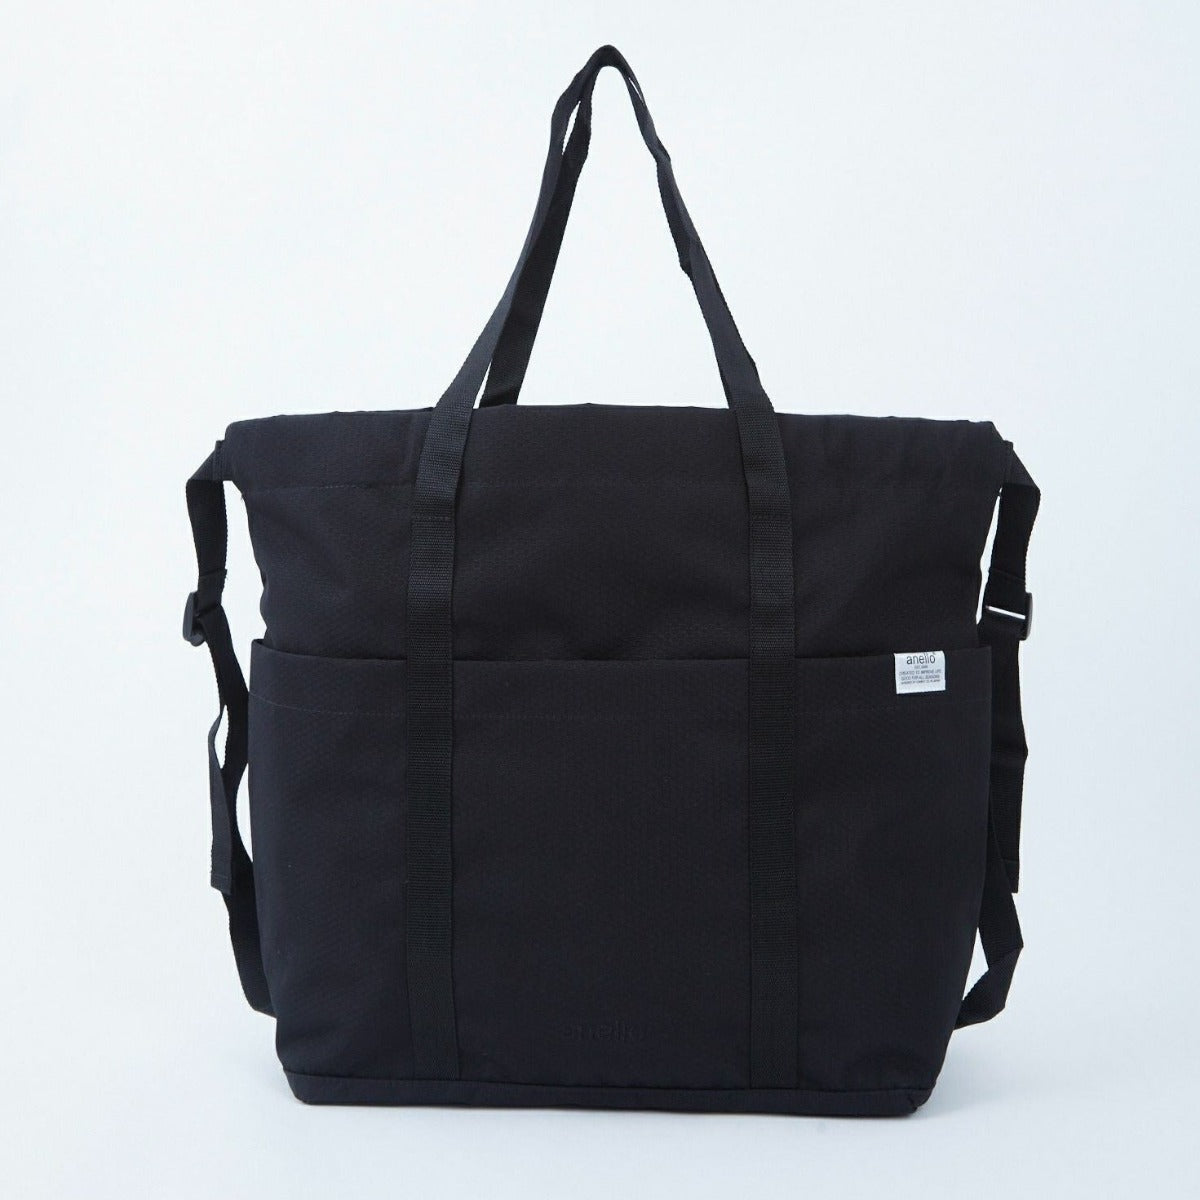 Anello Toy Tote Backpack in Black